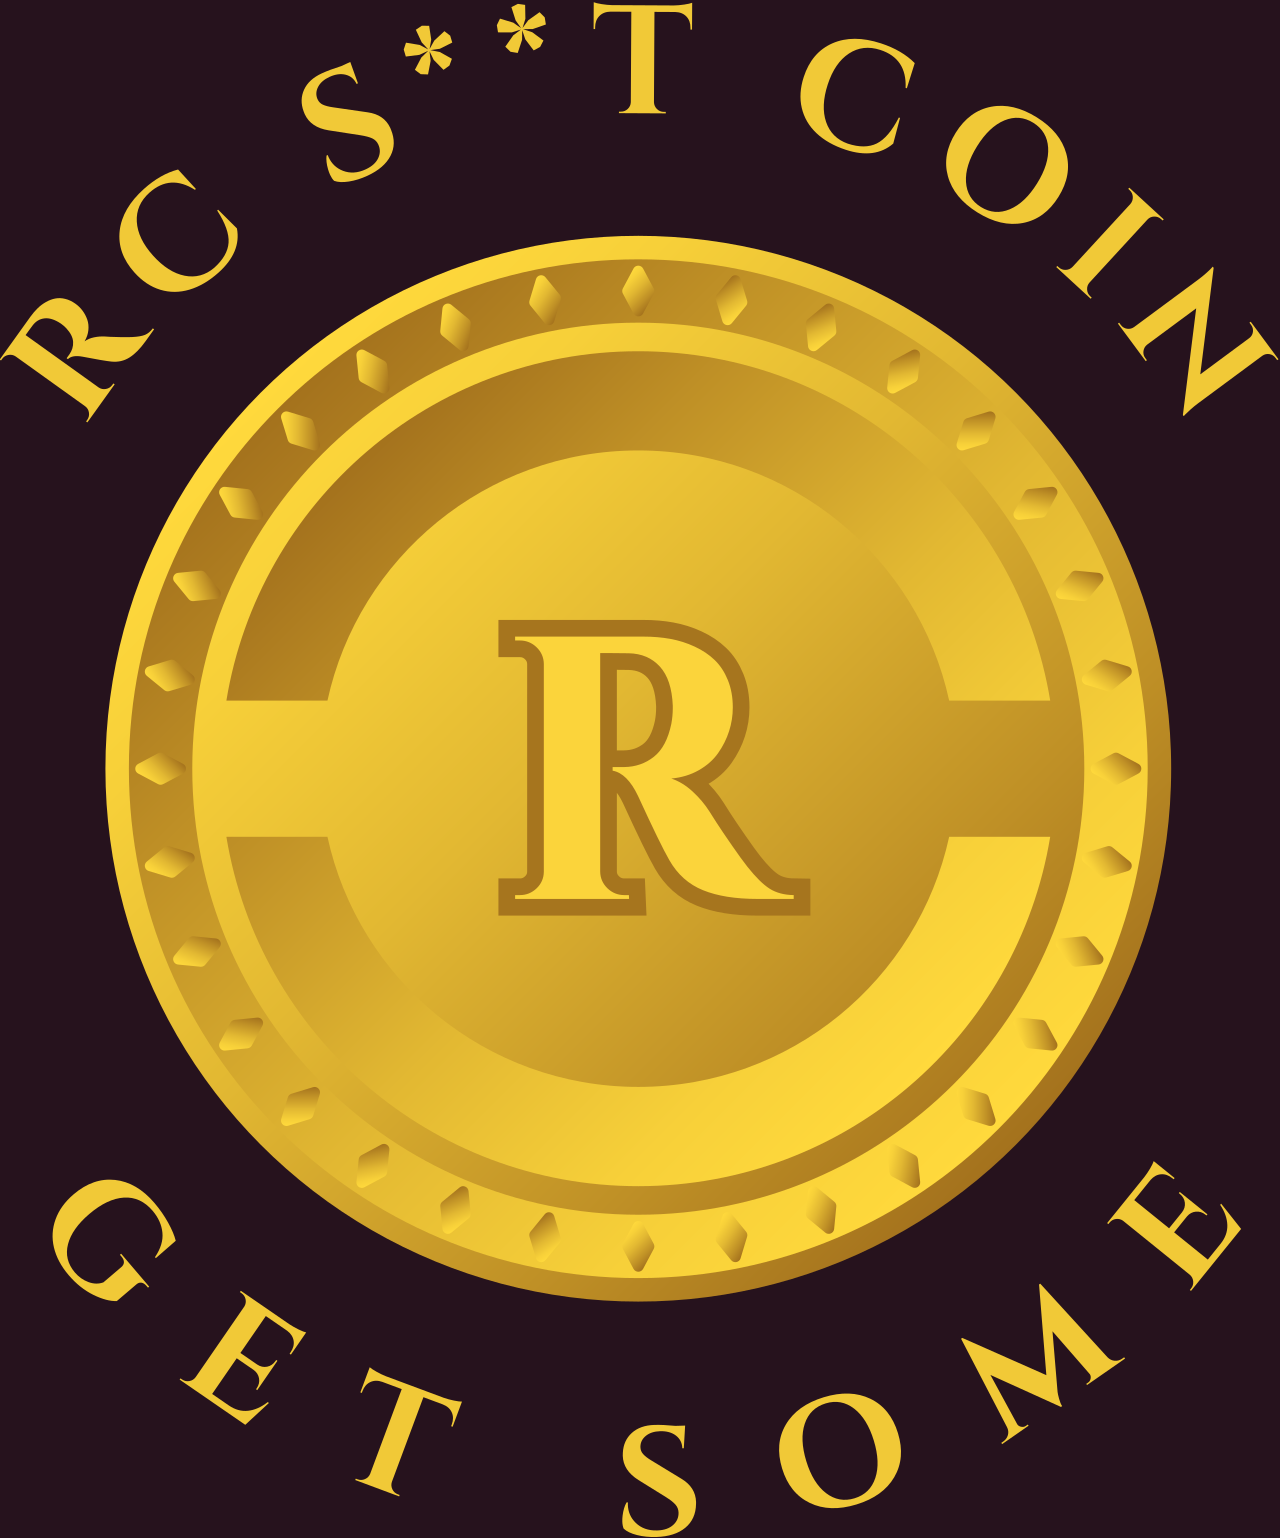 RC S**T COIN's web page